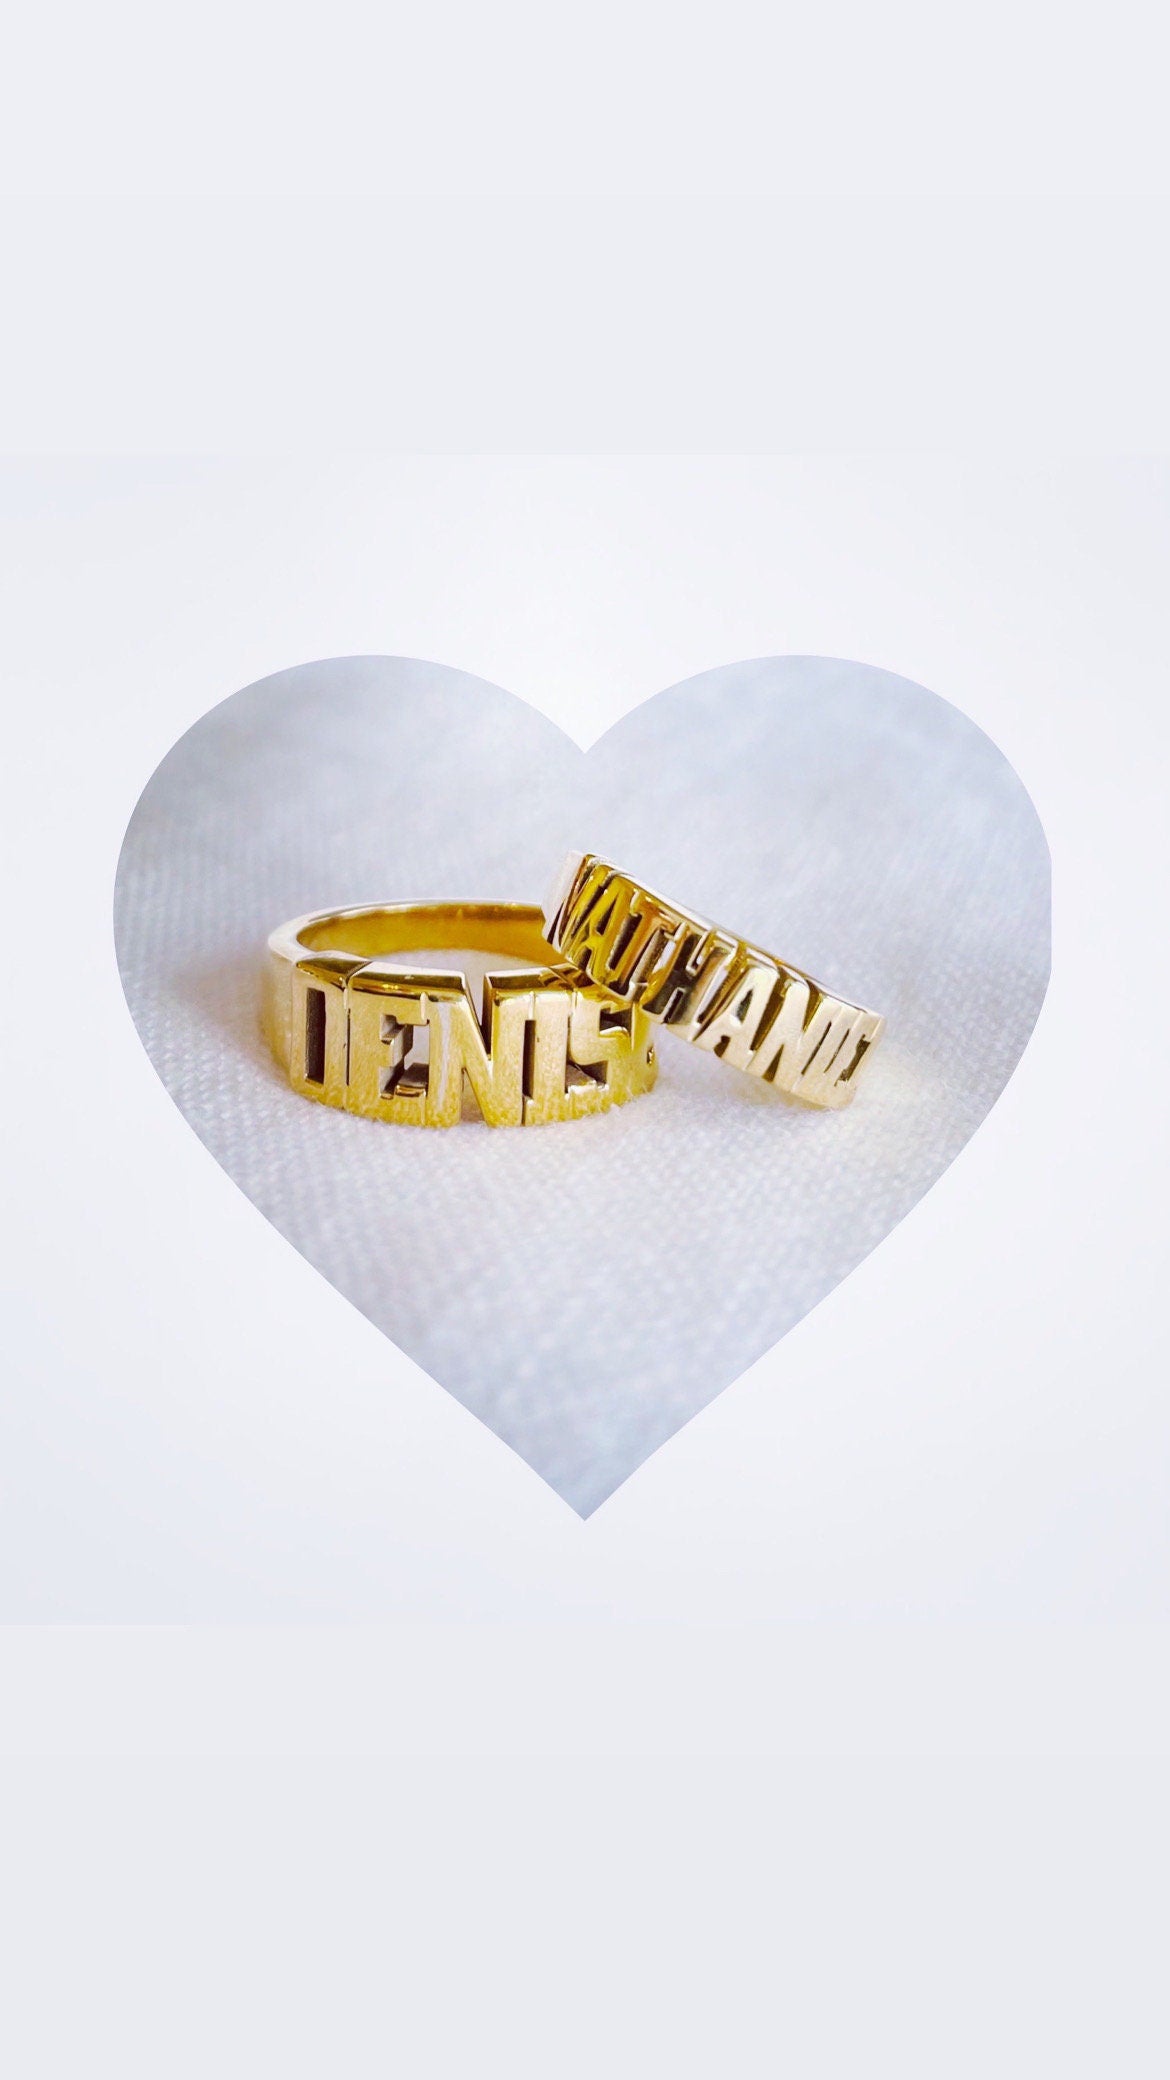 Personalized Name Ring 10k Yellow Gold, 10k White Gold, Sterling Silver Gift Box Included Ring Sizes 5-12 Metal Weight 12.2 Grams